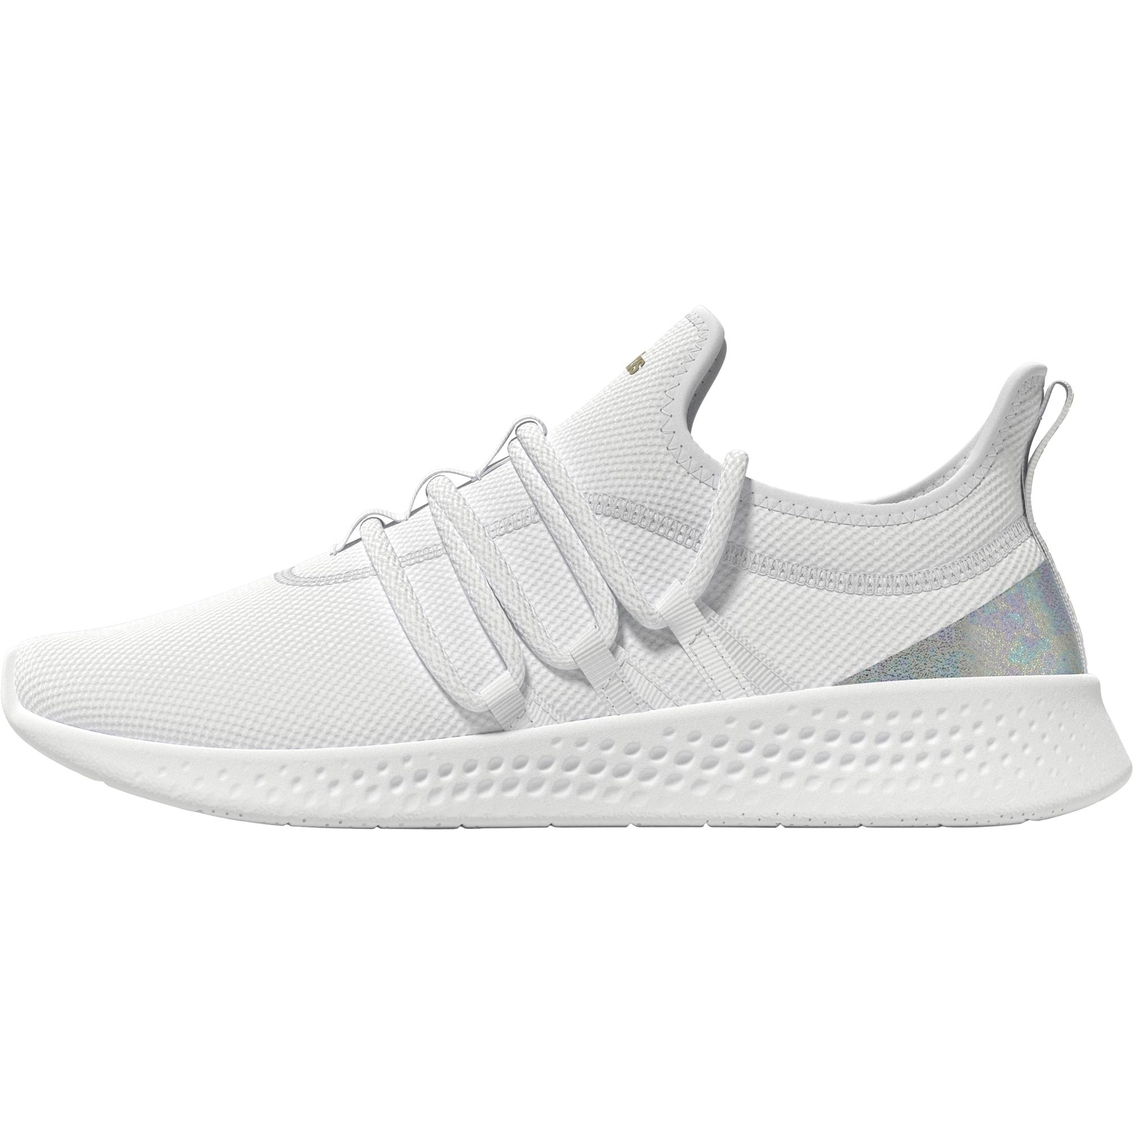 Adidas Women's Puremotion Adapt 2.0 Shoes - Image 2 of 3